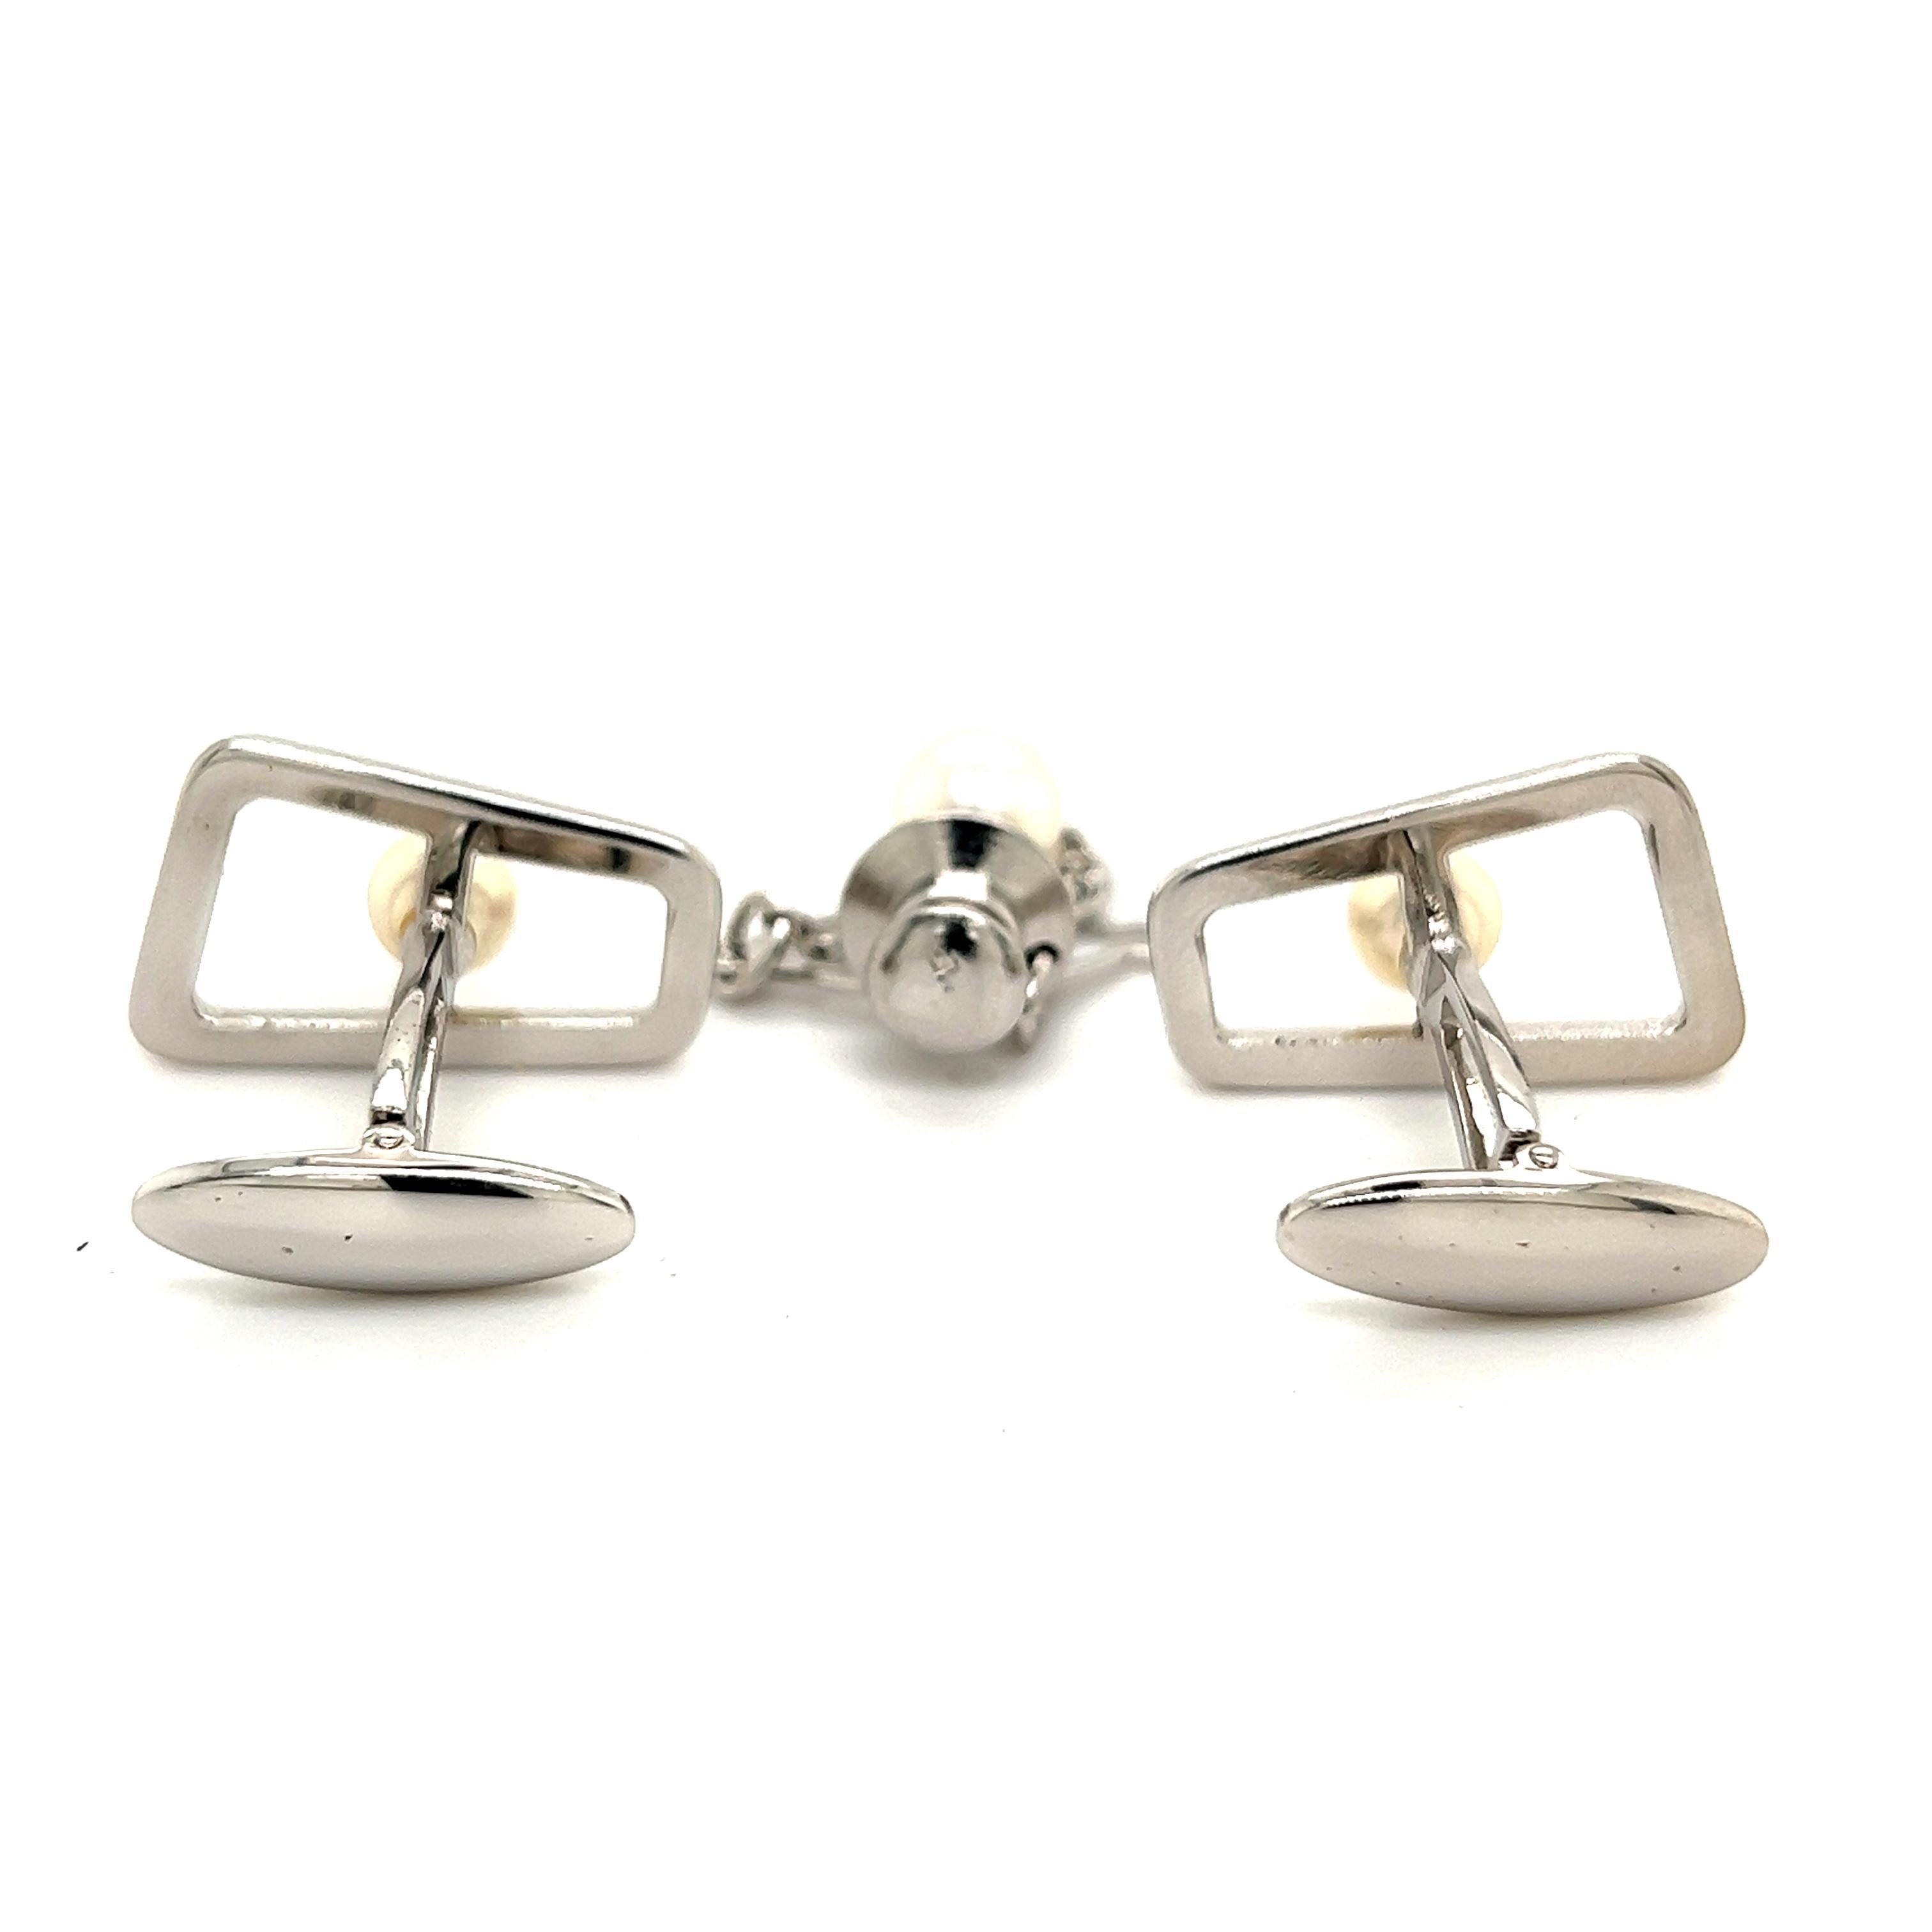 Mikimoto Estate Akoya Pearl Cufflinks and Tie Pin Sterling Silver 2